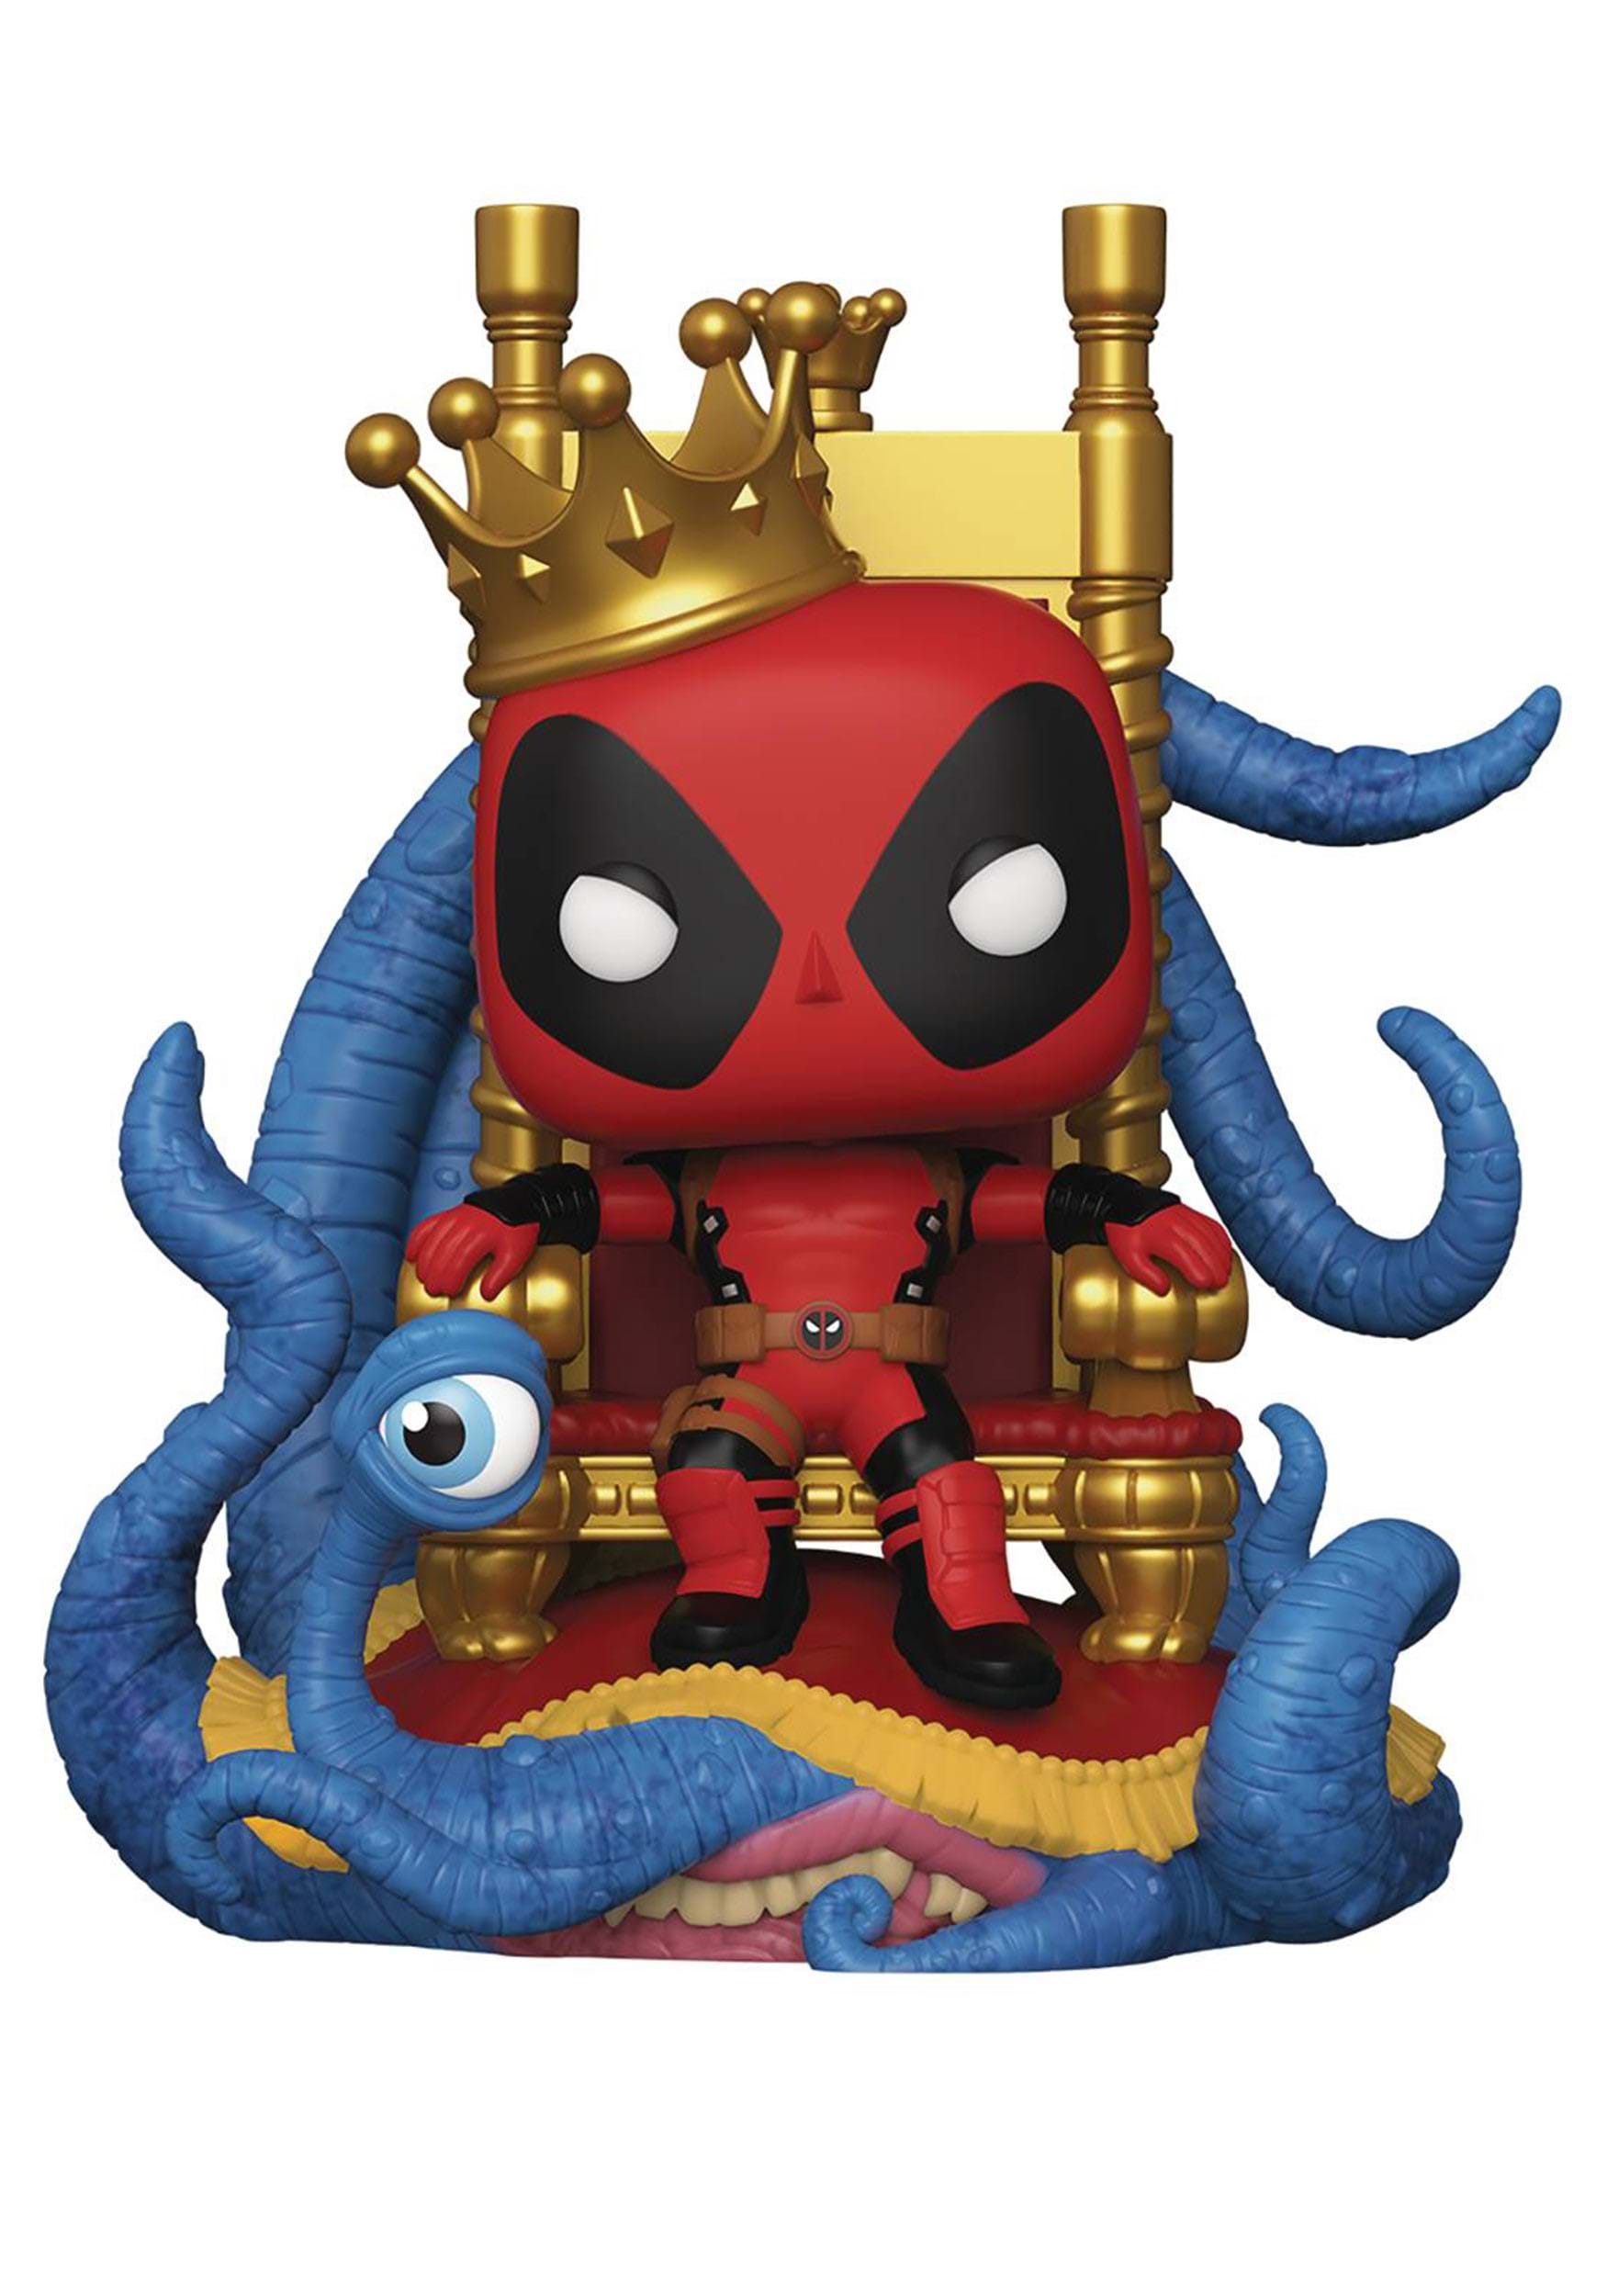 https://images.fun.co.uk/products/71809/1-1/funko-pop-deluxe-marvel-heroes-king-deadpool-on-throne.jpg